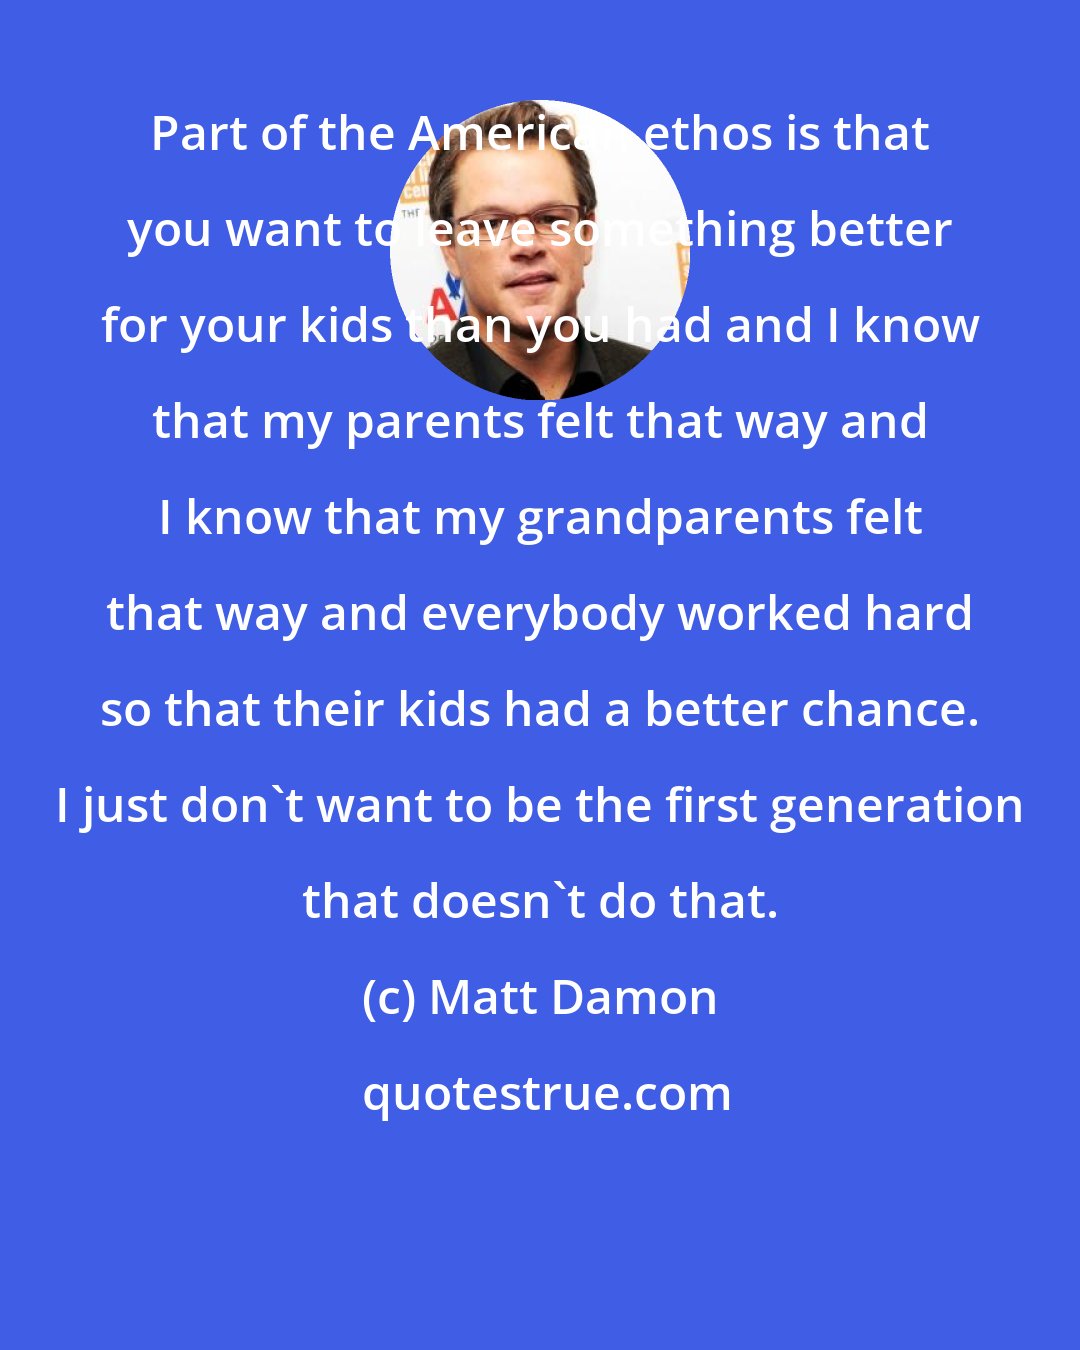 Matt Damon: Part of the American ethos is that you want to leave something better for your kids than you had and I know that my parents felt that way and I know that my grandparents felt that way and everybody worked hard so that their kids had a better chance. I just don't want to be the first generation that doesn't do that.